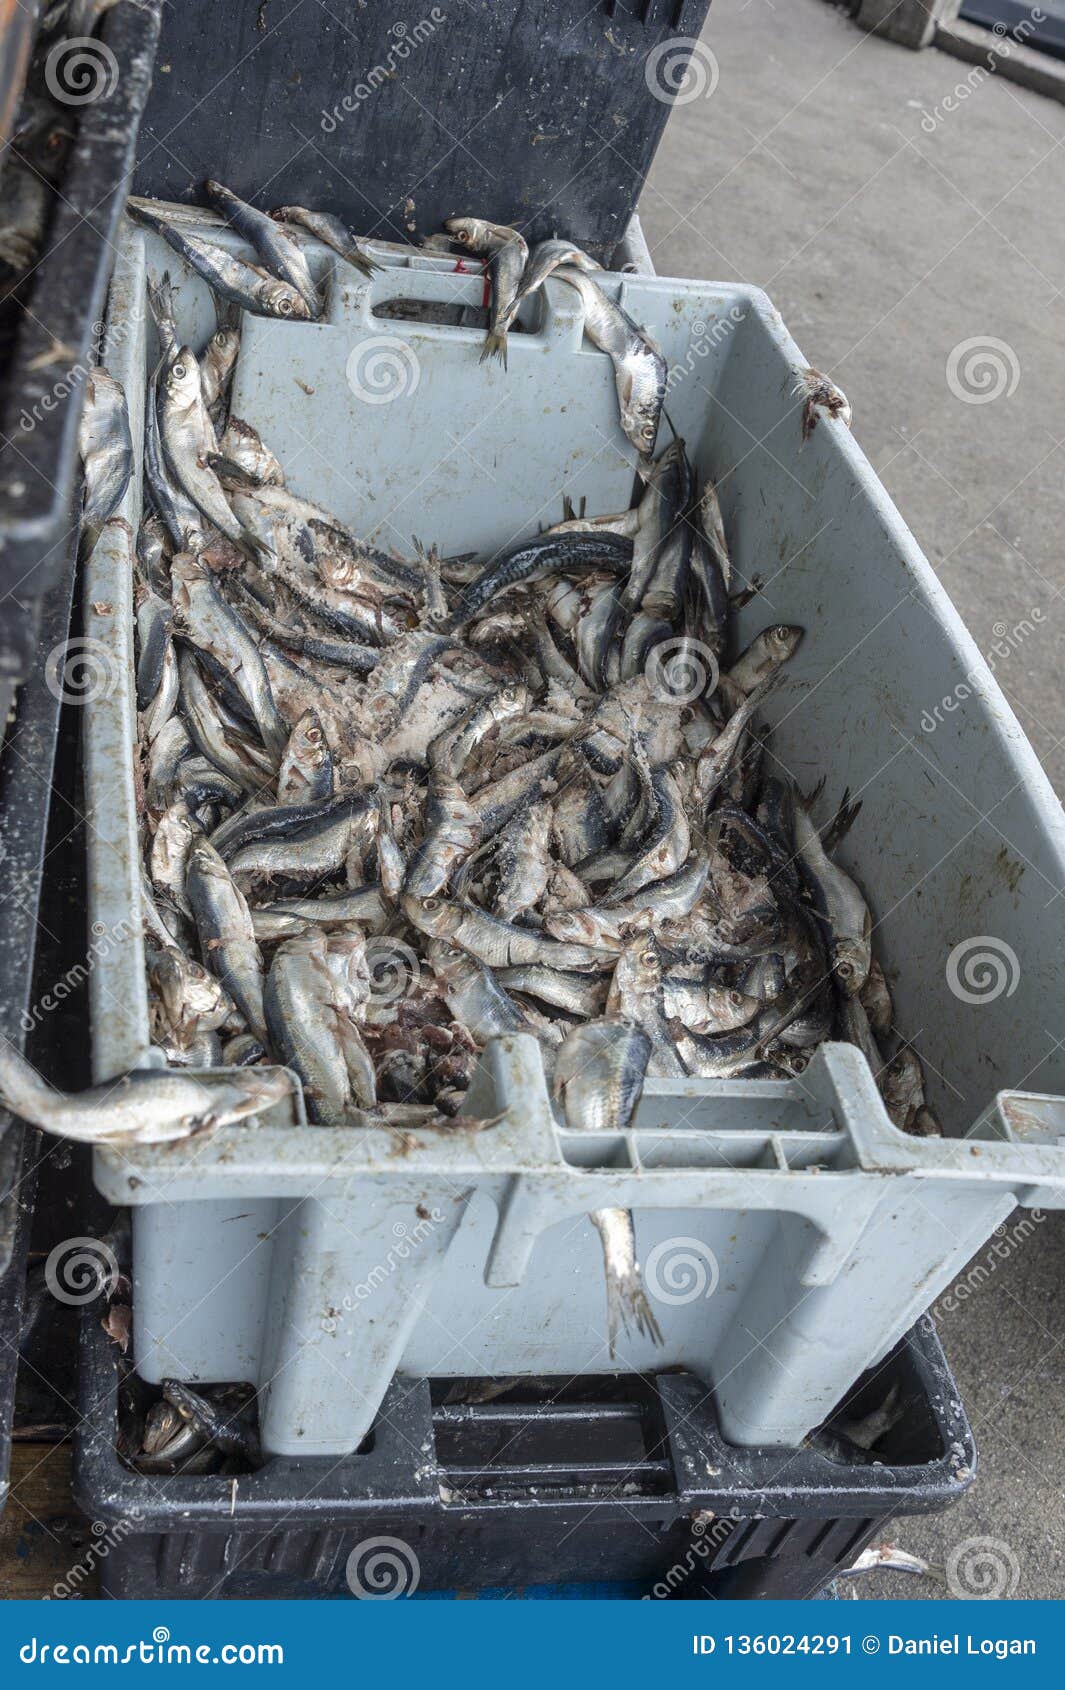 Crate of Herring for Lobster Bait Stock Image - Image of bait, commercial:  136024291